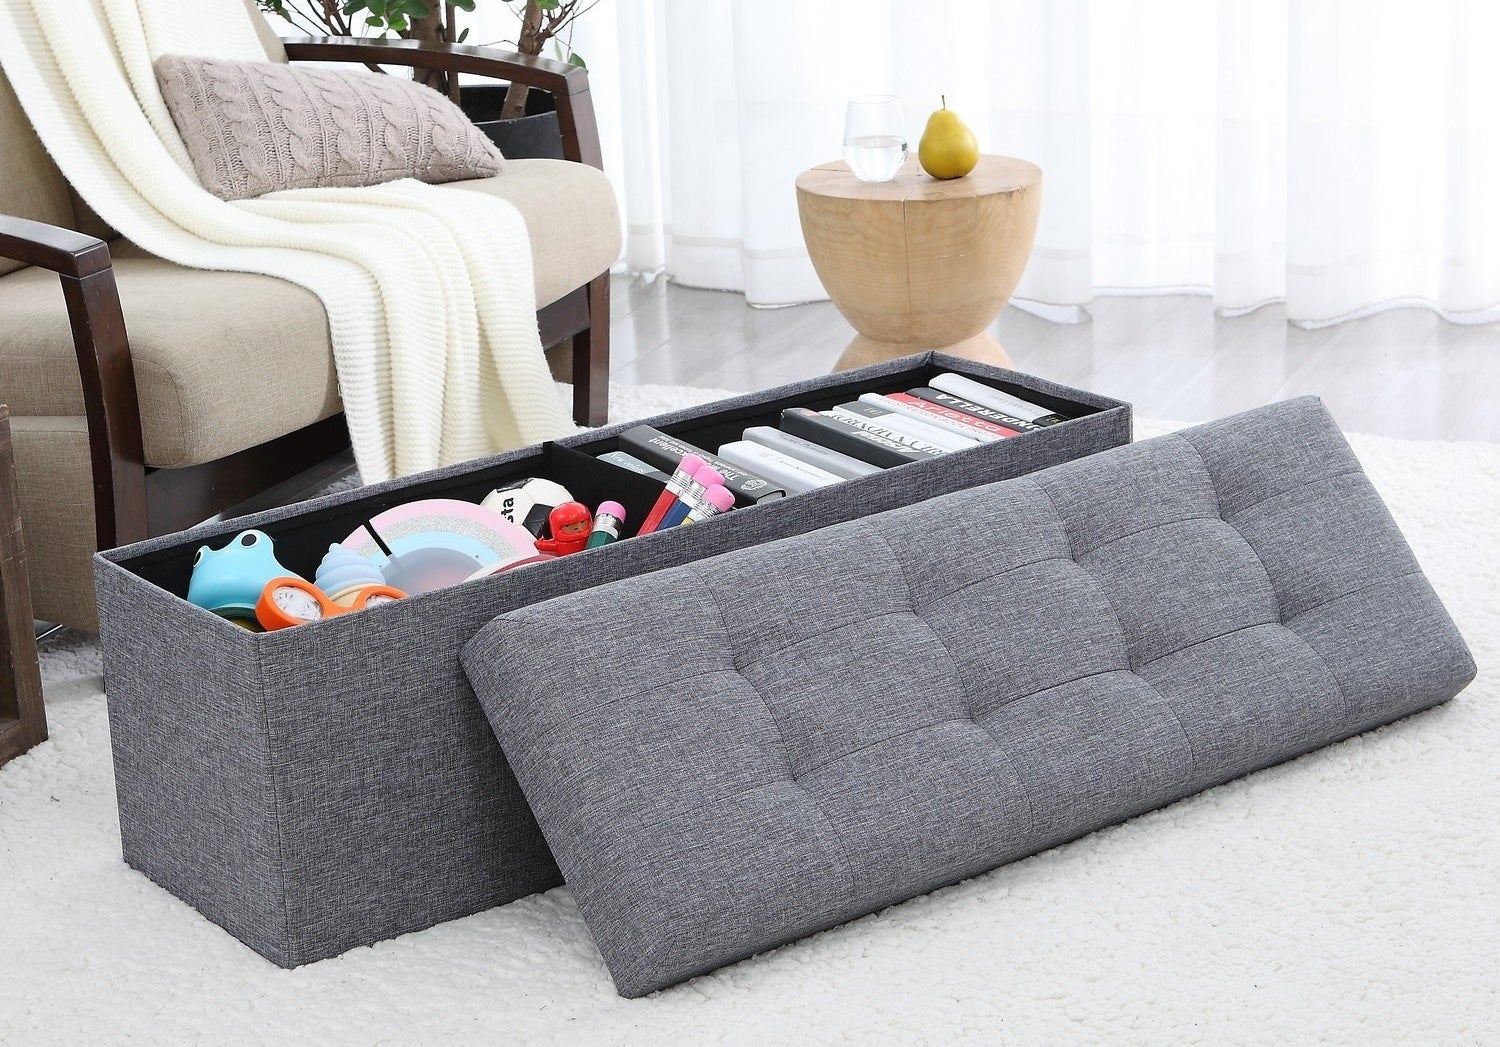 24 Things To Organize All The Miscellaneous Stuff Lying Around Your Home